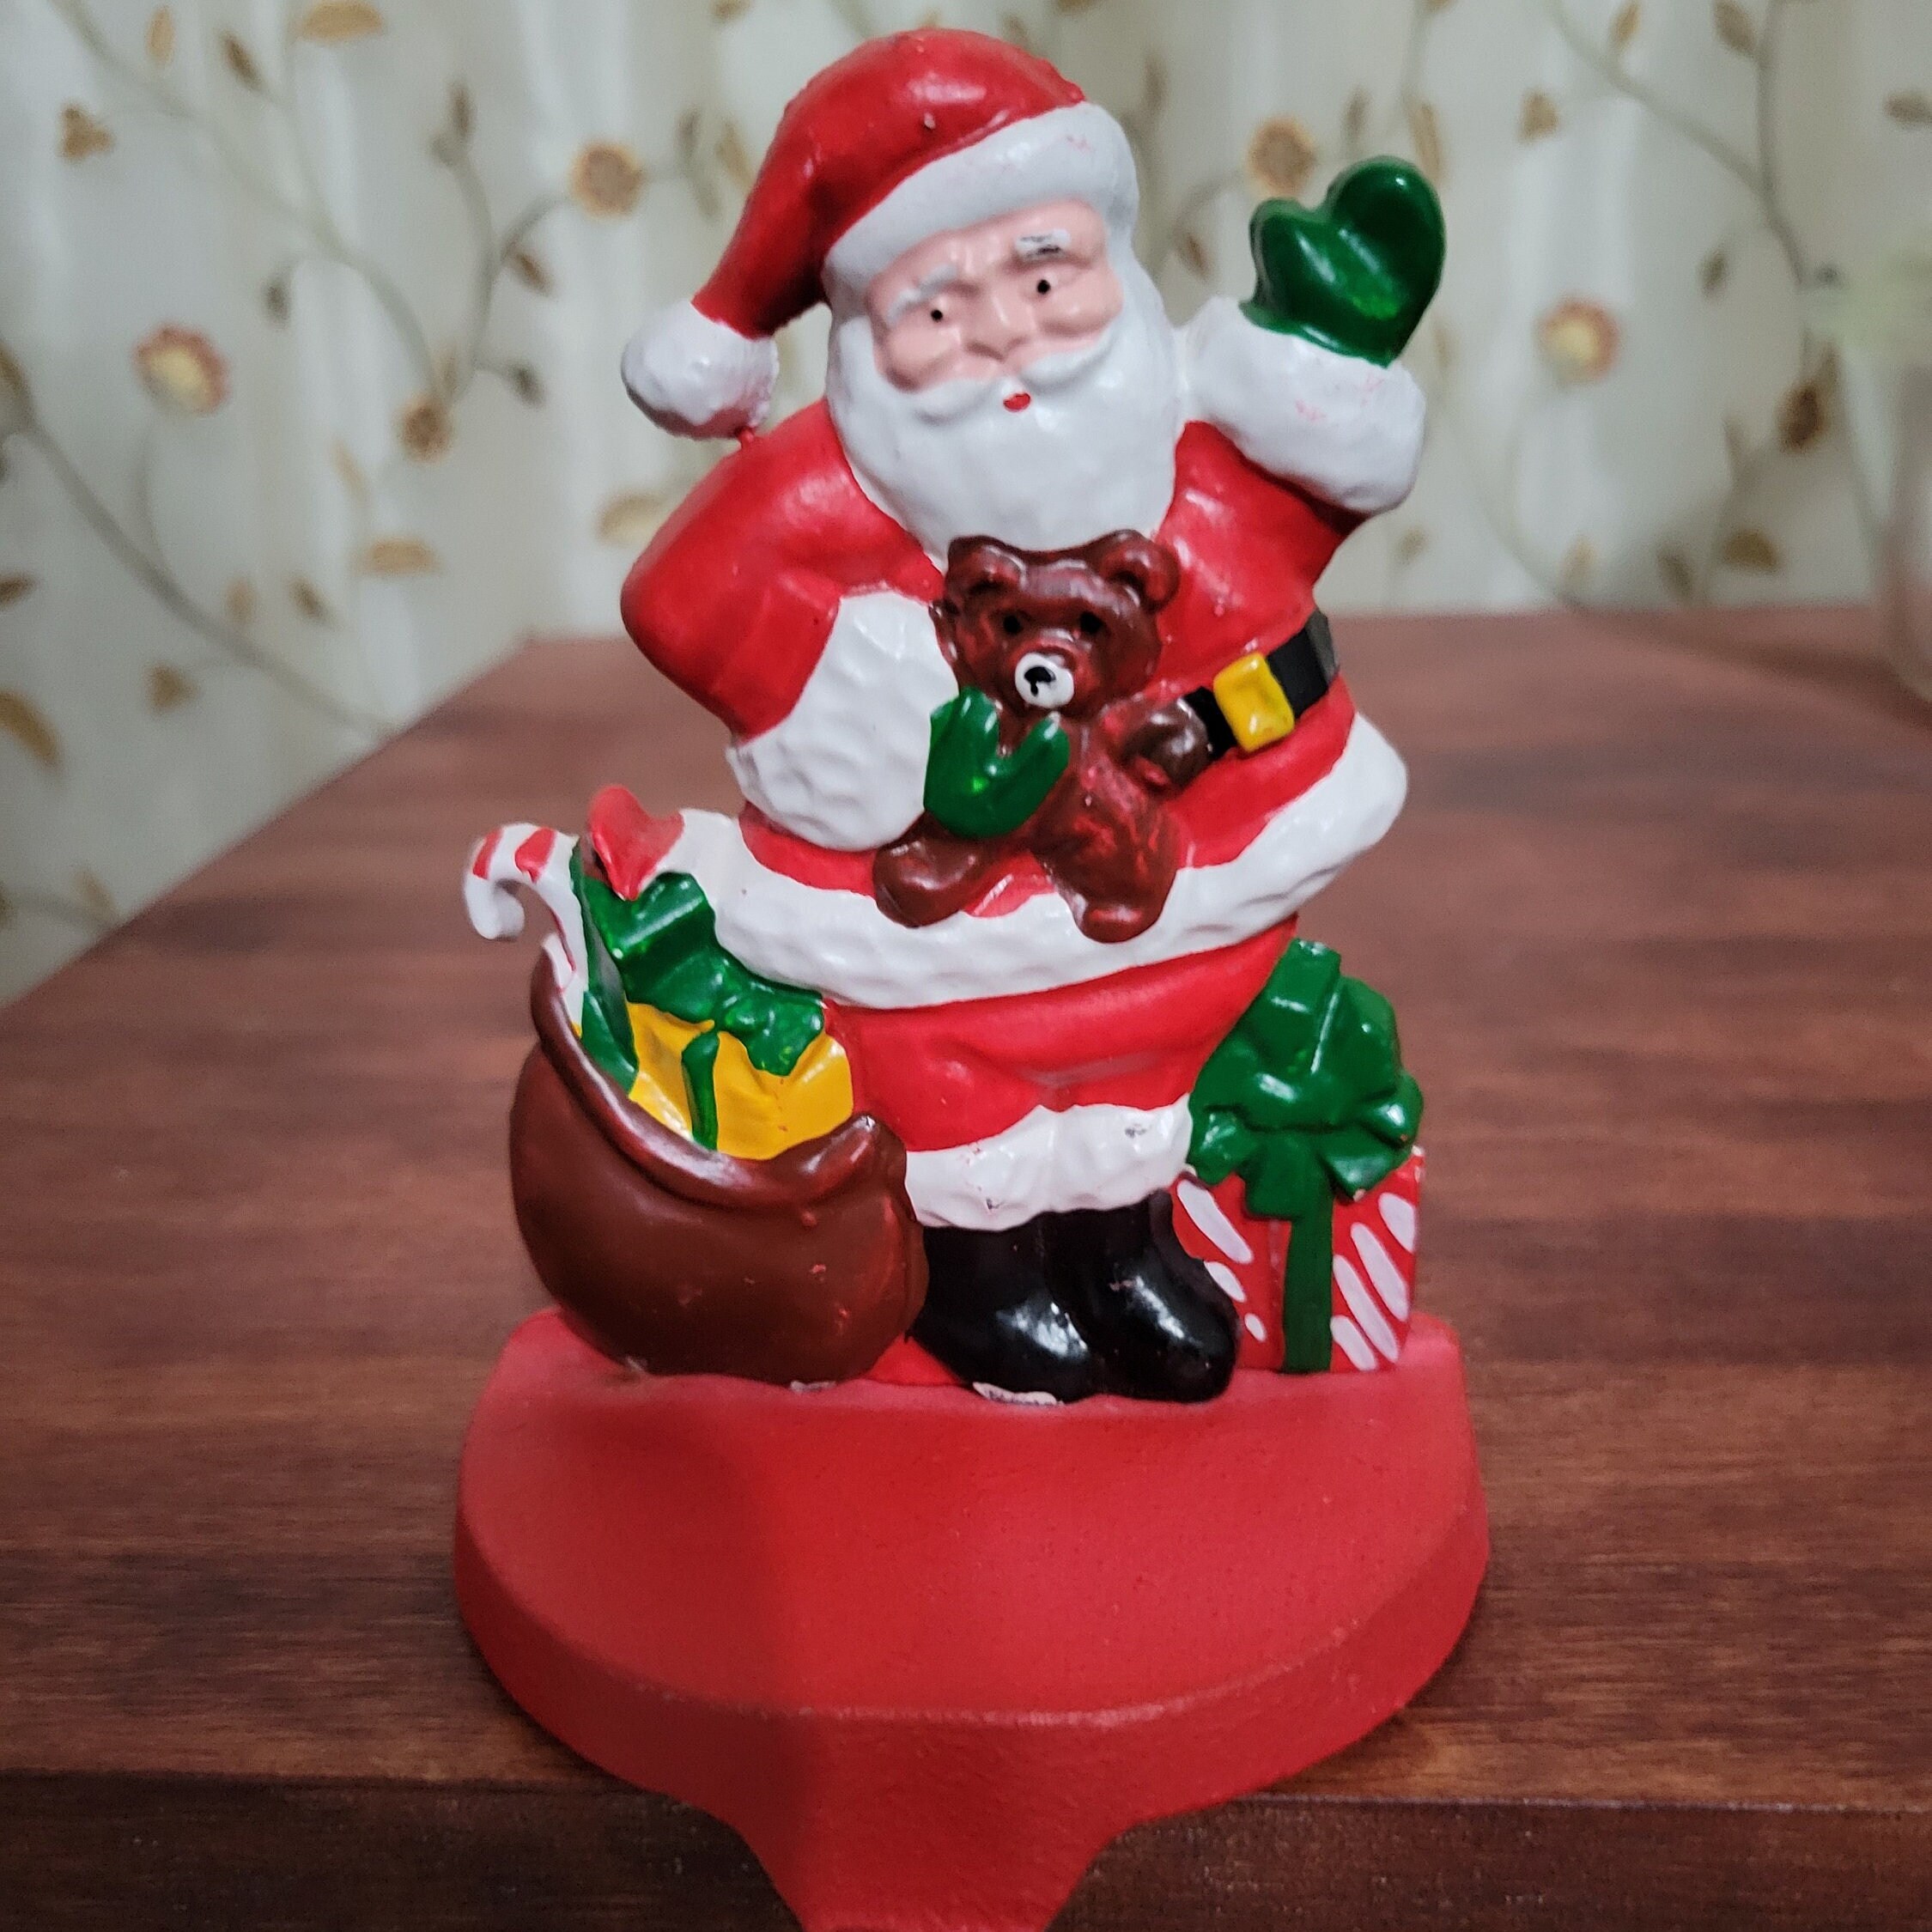 Heritage Mint Holiday Ice Sculpture Lighted Stocking Hanger Santa Claus,  Christmas Stocking Hanger -  Finland